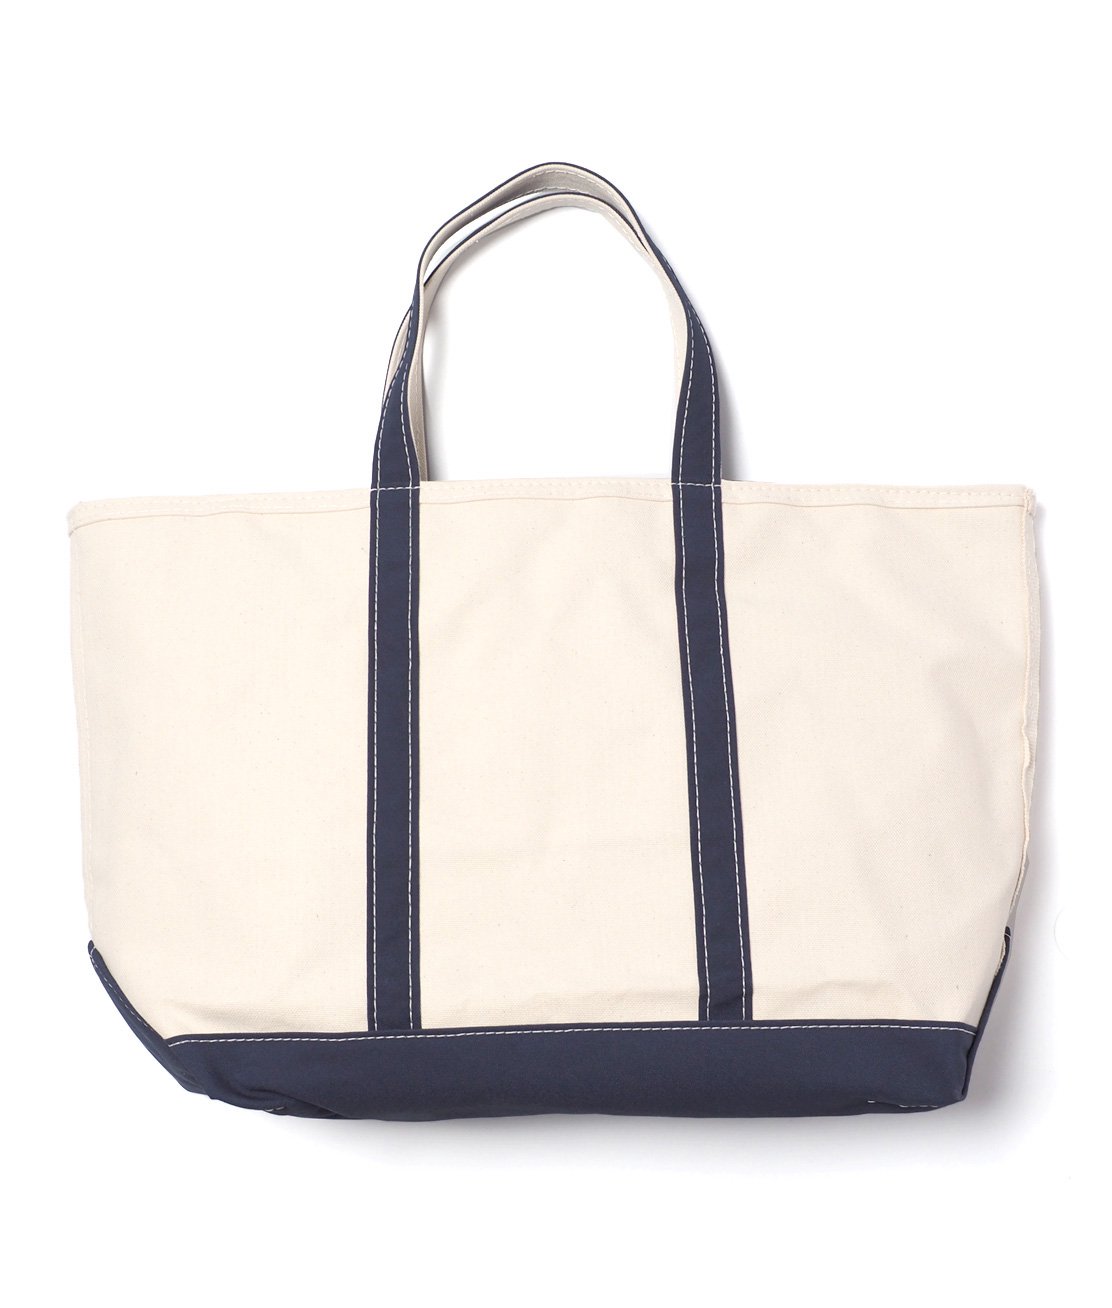 L.L.BEAN×WAS BOAT AND TOTE LARGE/BLUE渋谷の店舗で購入 - トートバッグ